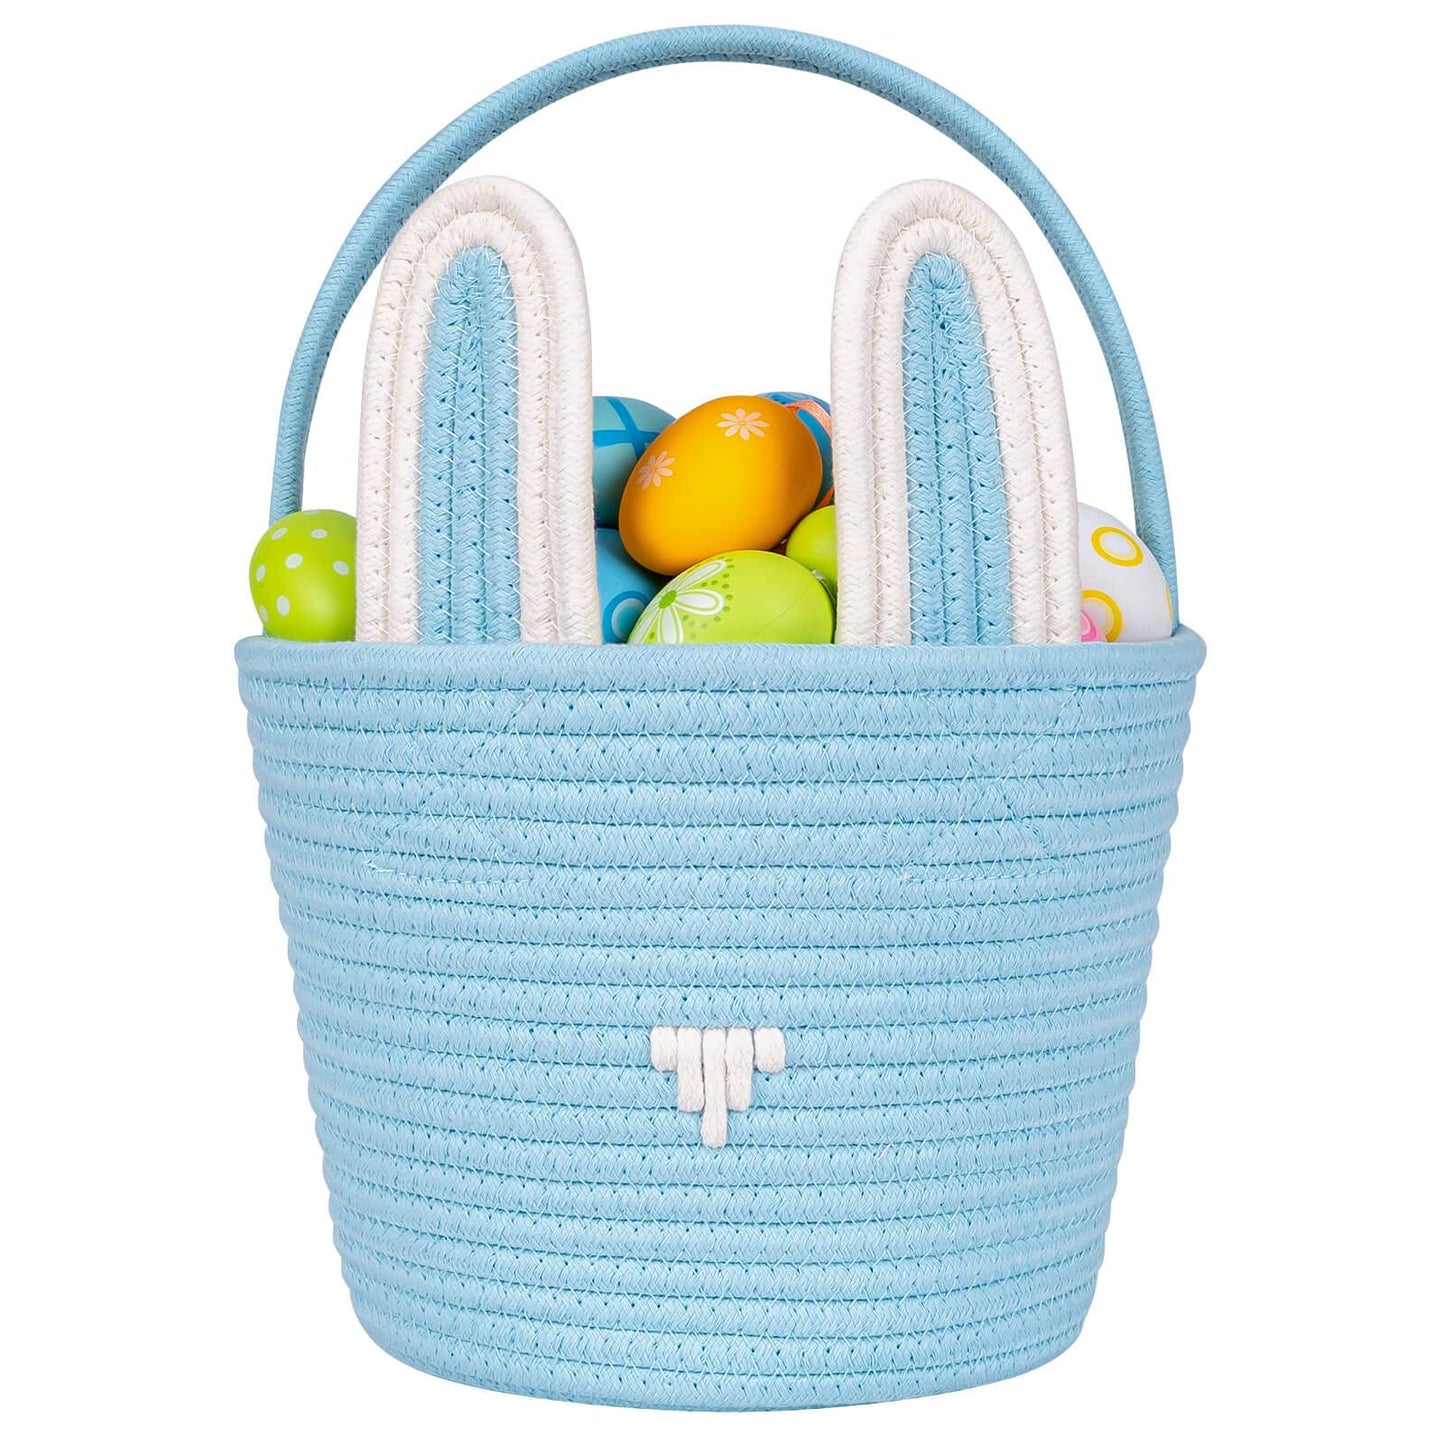 CubesLand Easter Baskets Easter Egg Hunt Baskets for Kids, Cute Bunny Gift Basket for Baby Easter Decorations Party Supplies Grey White 9.8 x 7.8 x 7.8”